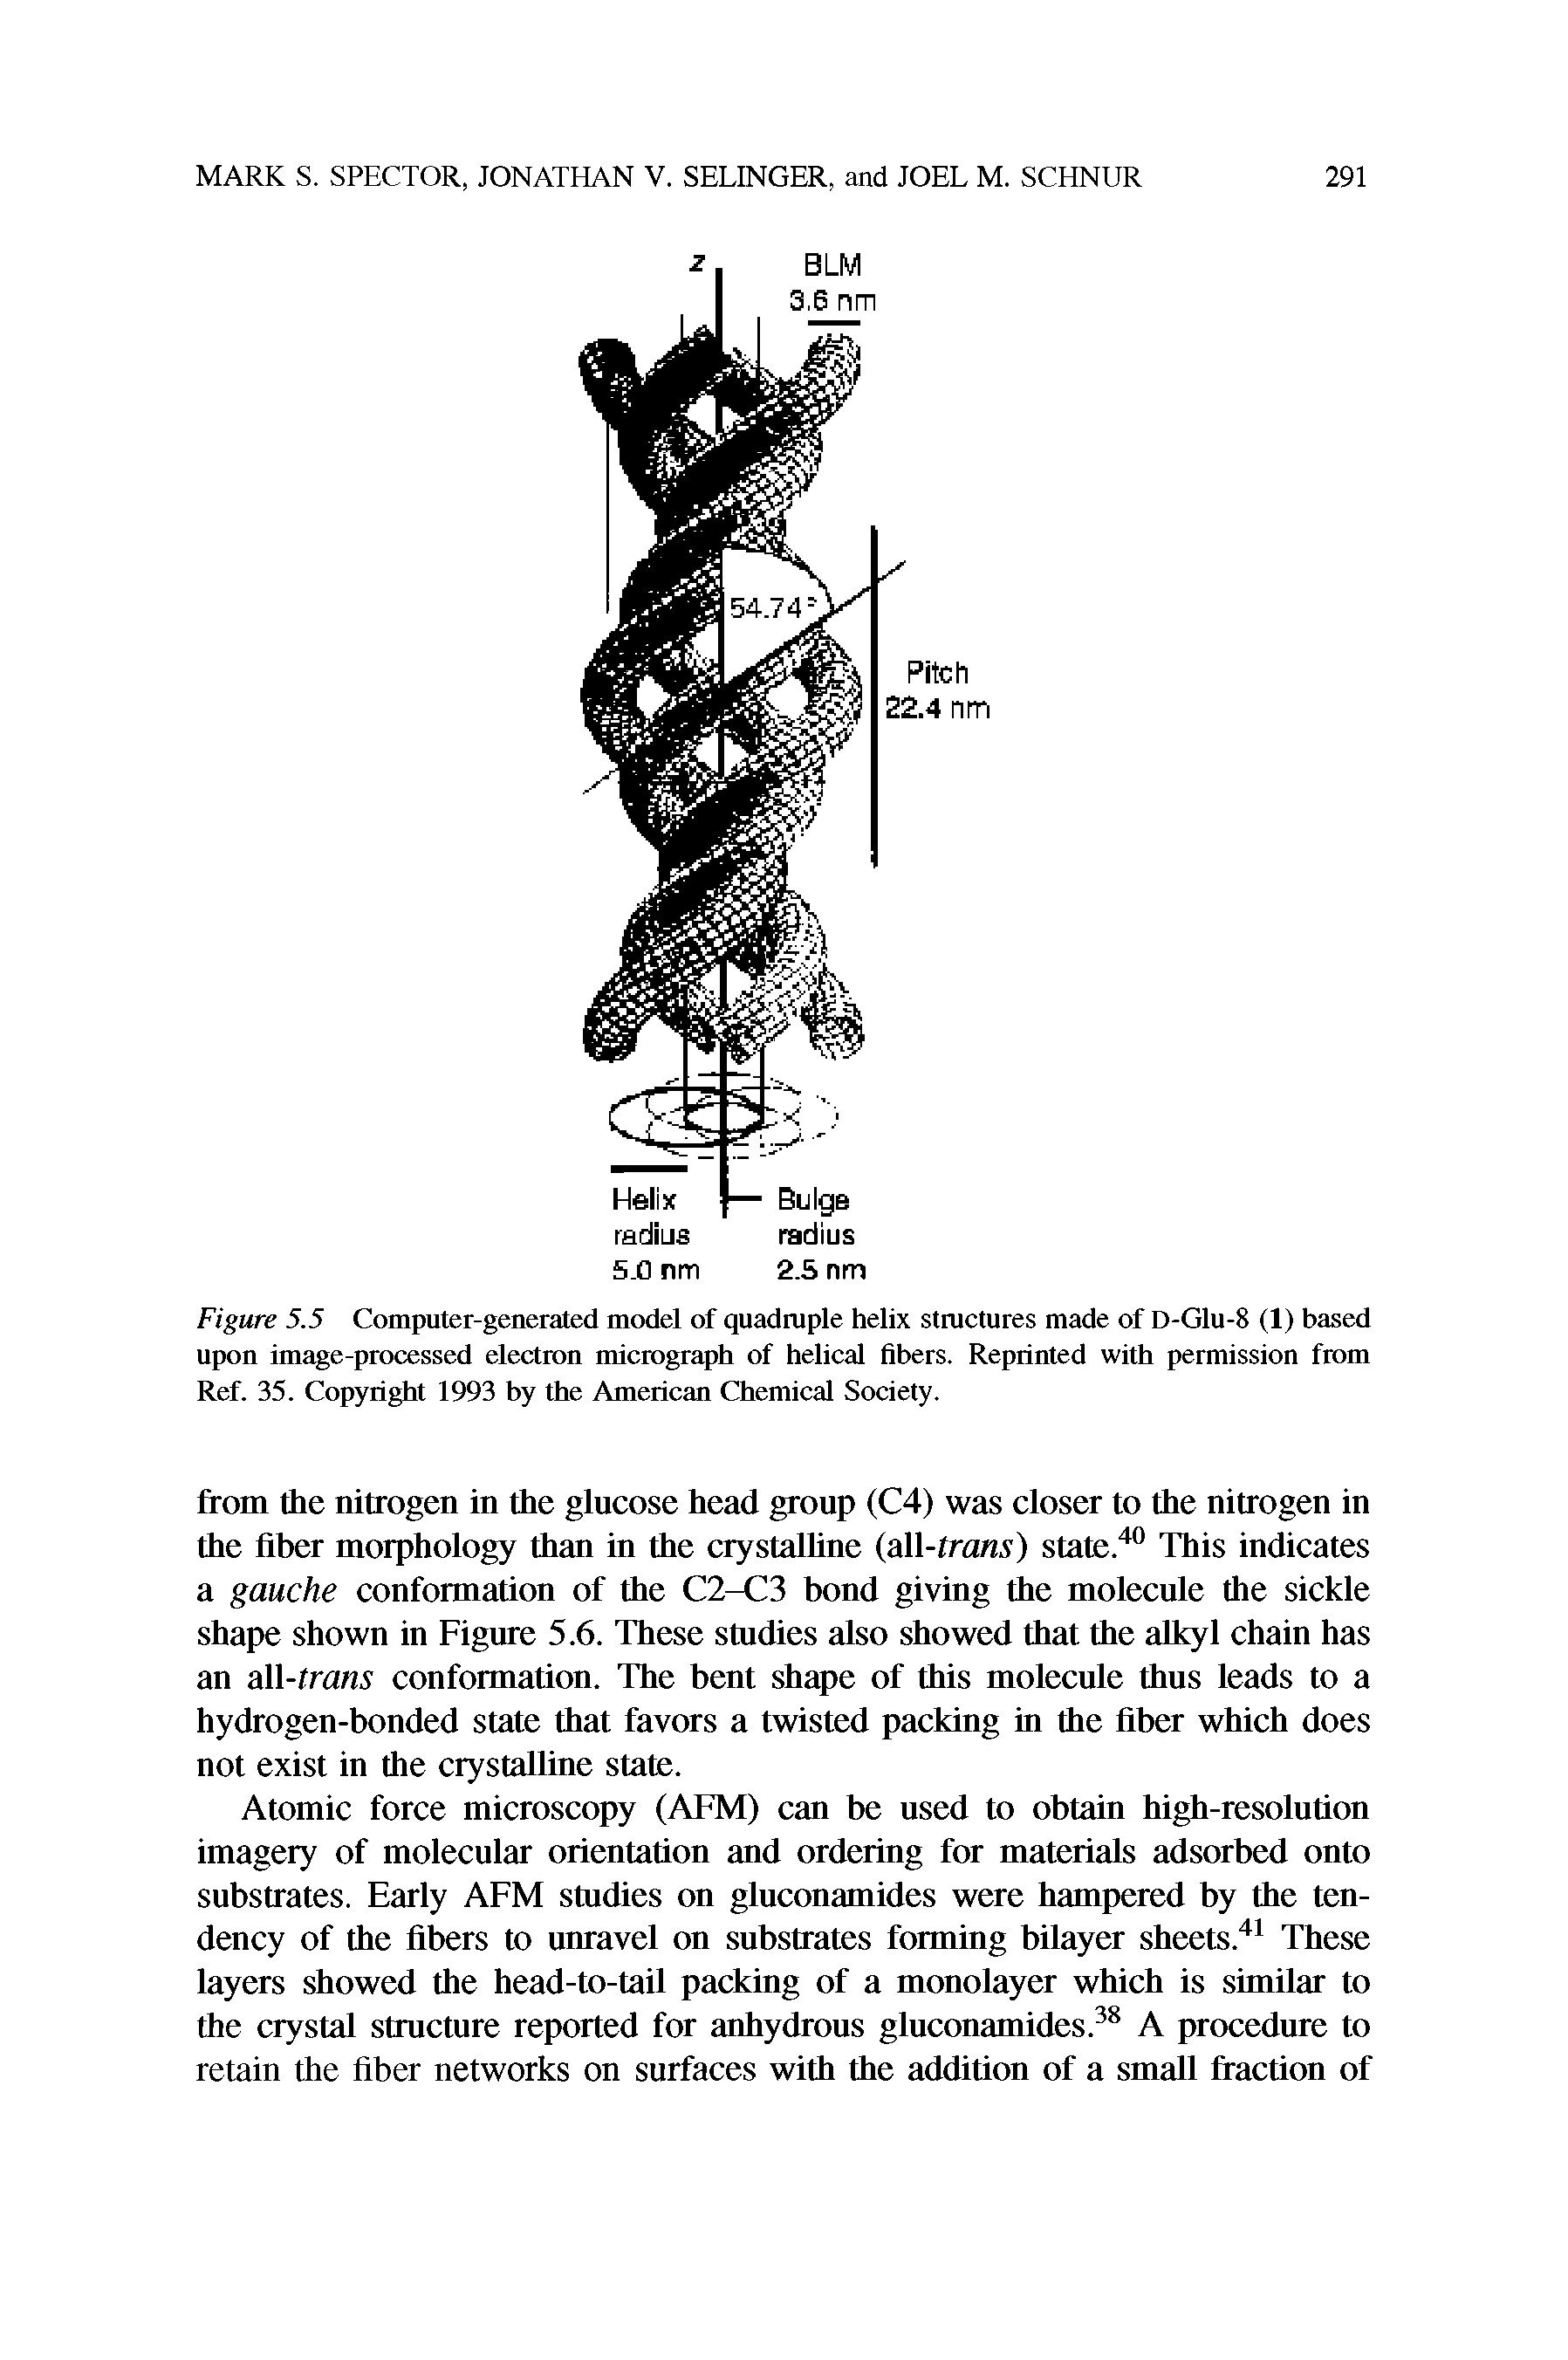 Figure 5.5 Computer-generated model of quadruple helix structures made of D-Glu-8 (1) based upon image-processed electron micrograph of helical fibers. Reprinted with permission from Ref. 35. Copyright 1993 by the American Chemical Society.